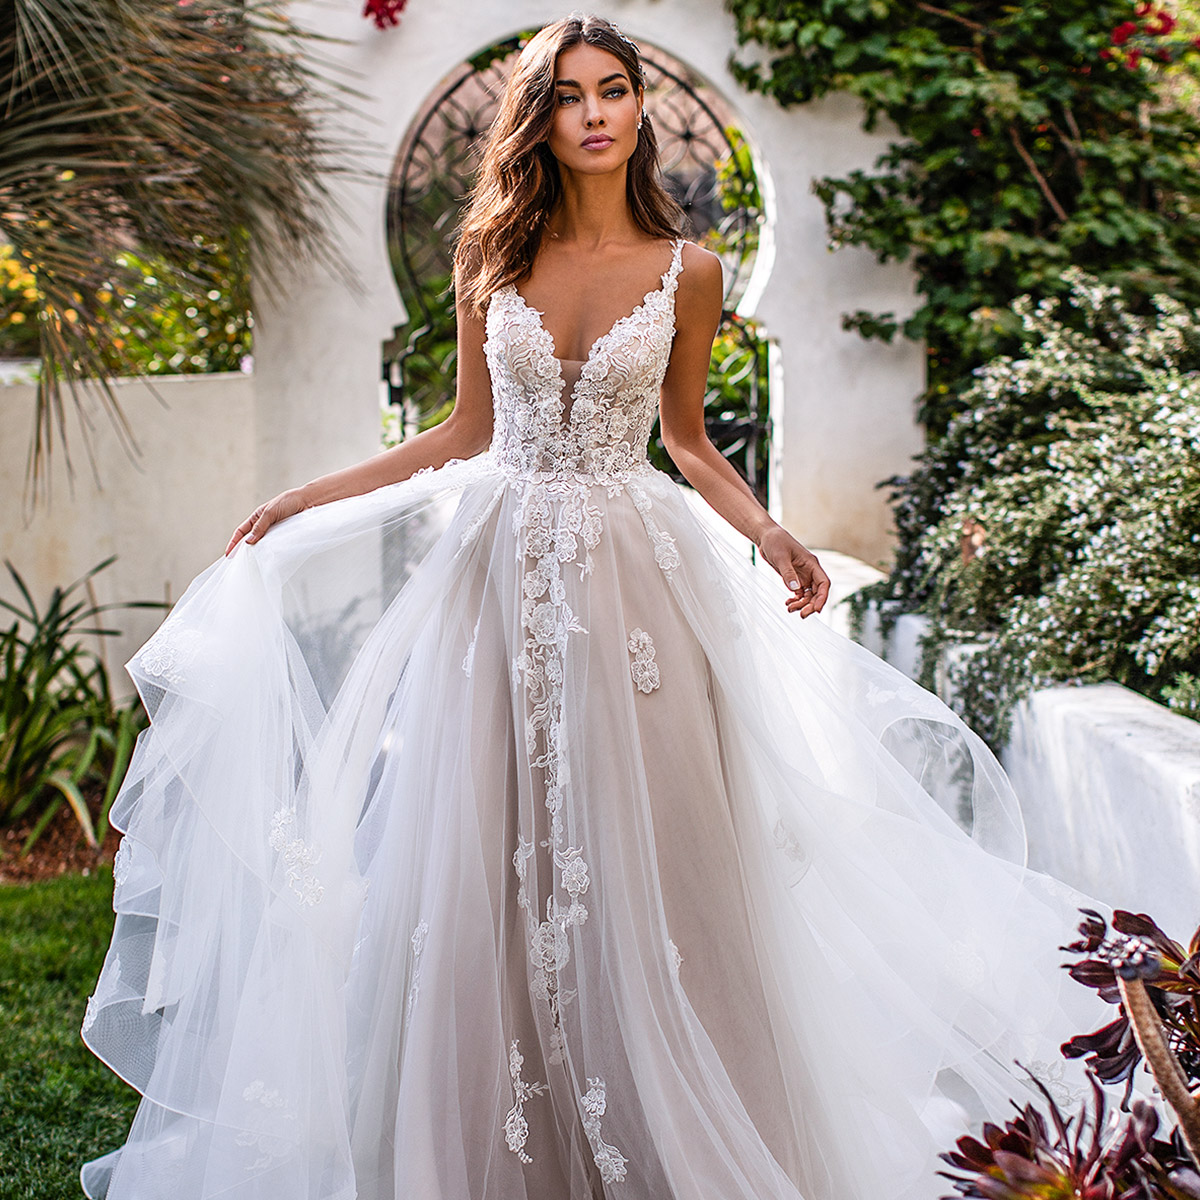  Pinterest Wedding Dress in the world Check it out now 